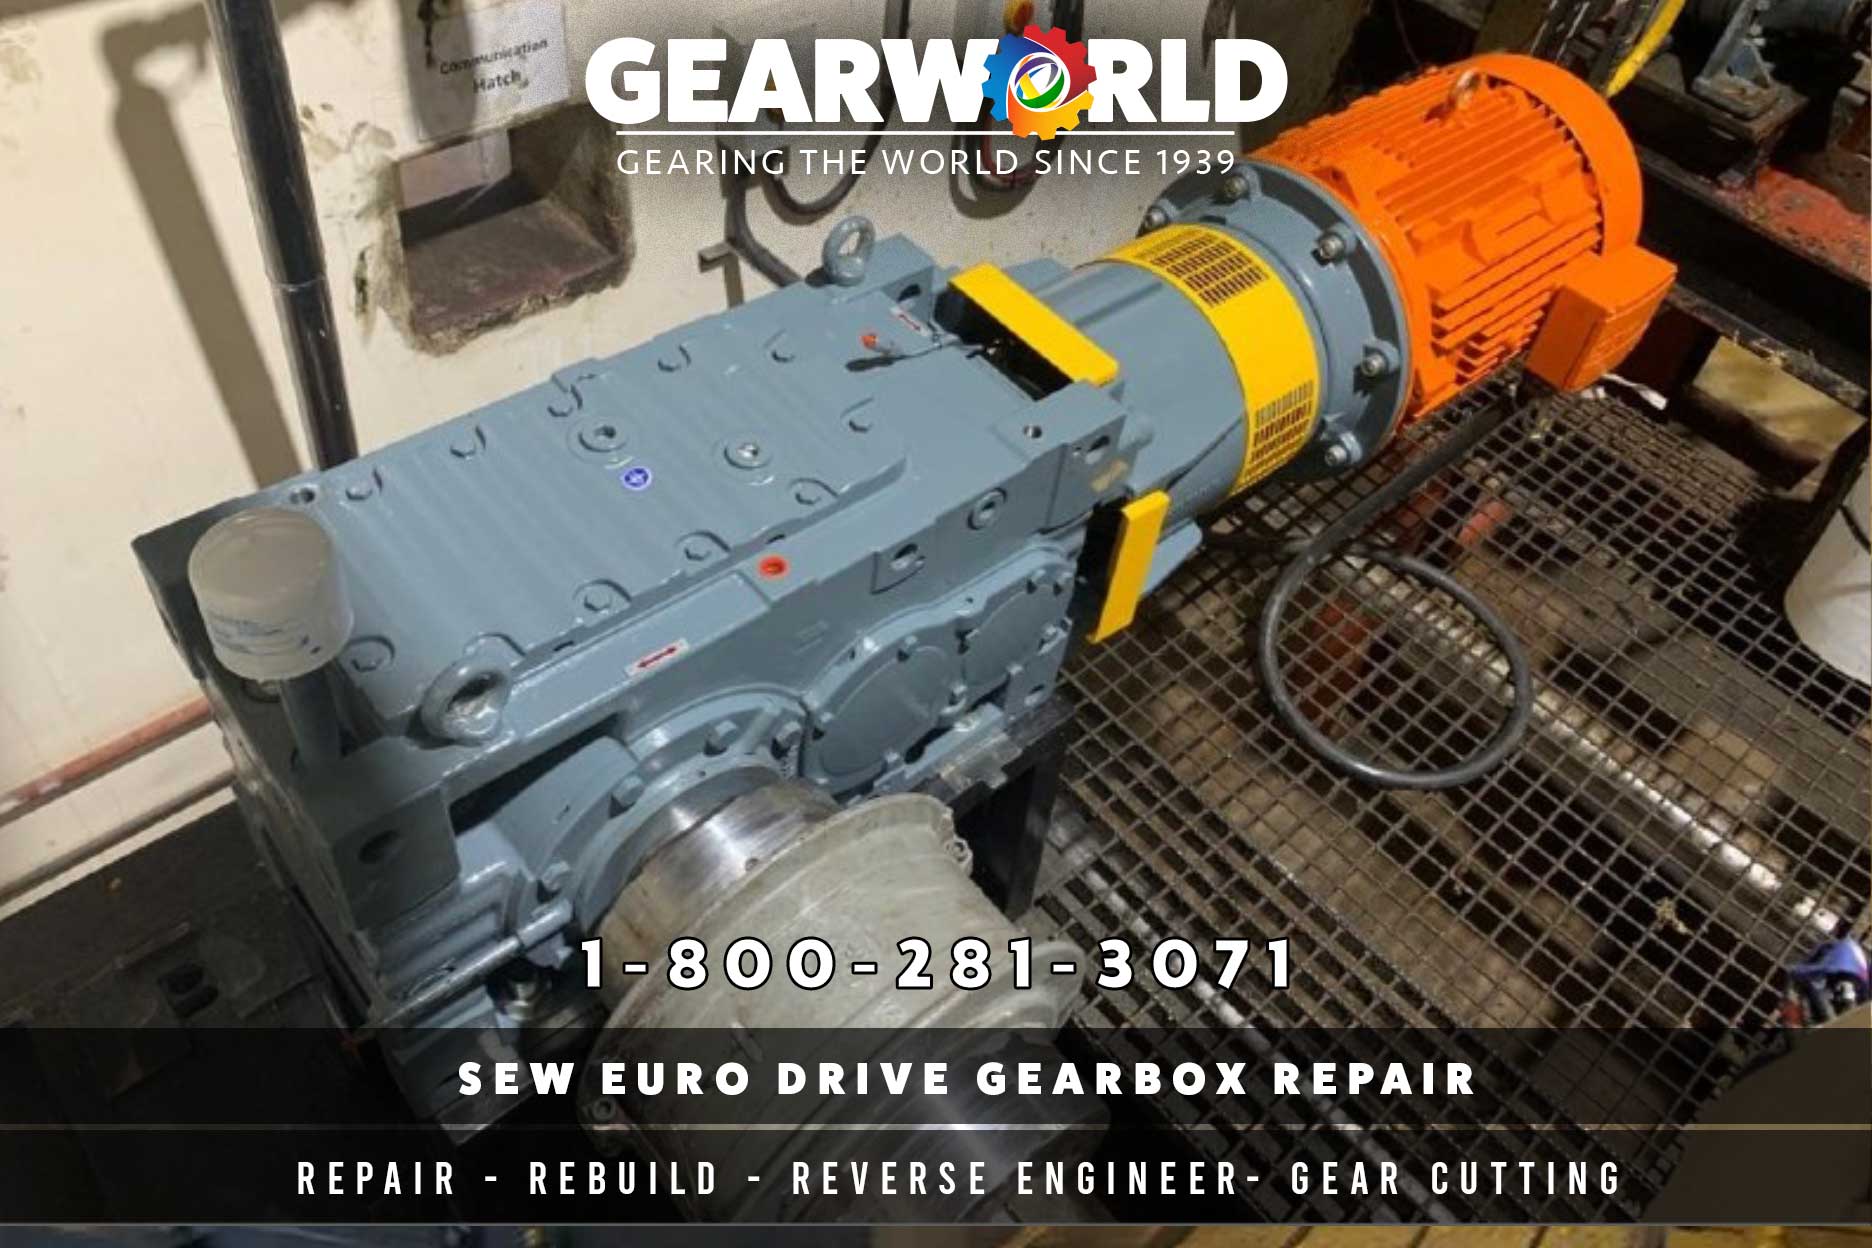 SEW Euro Drive Gearbox